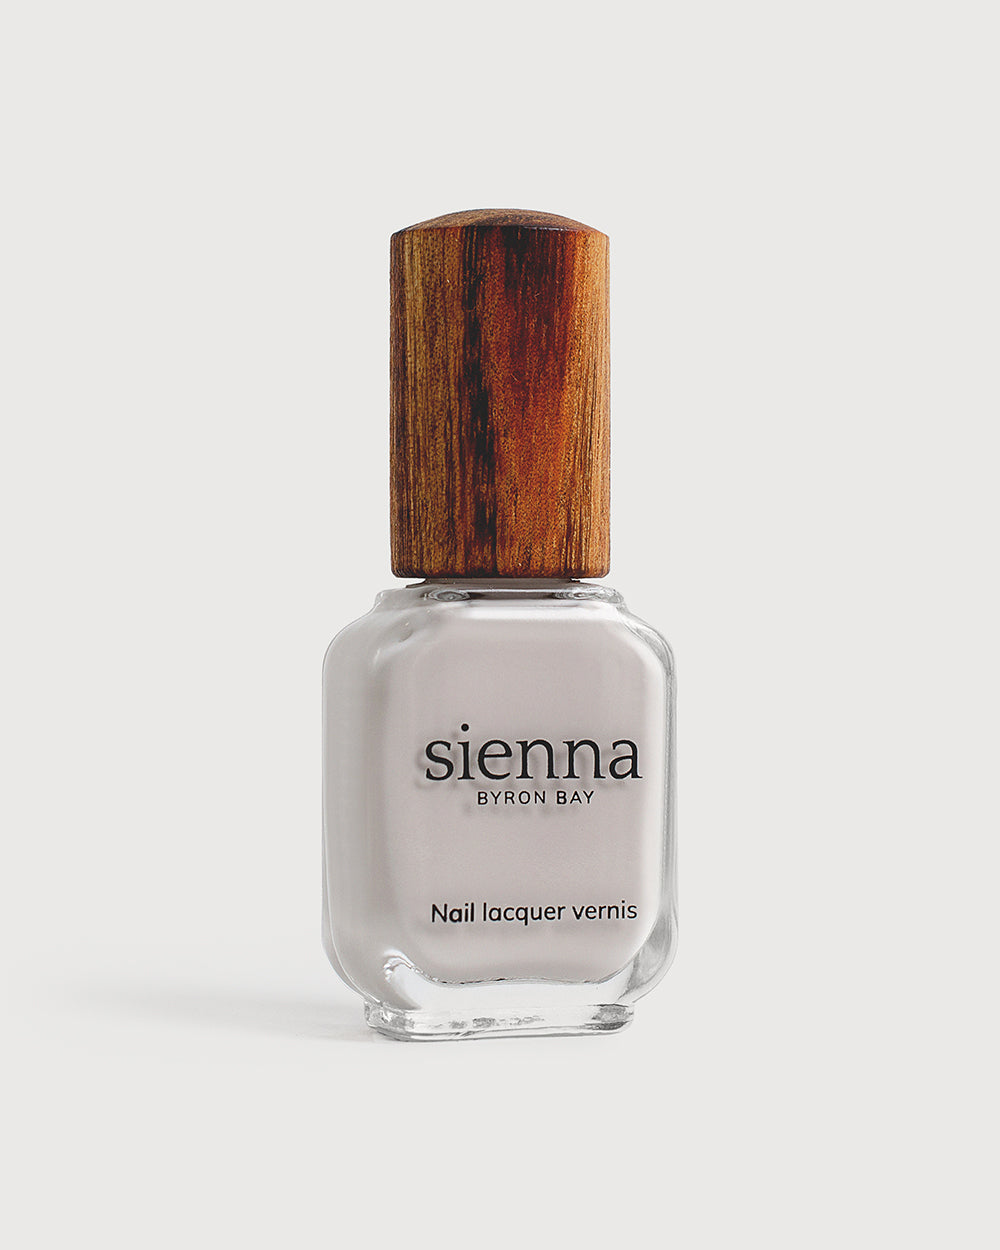 cool grey nail polish in a glass bottle with a timber cap